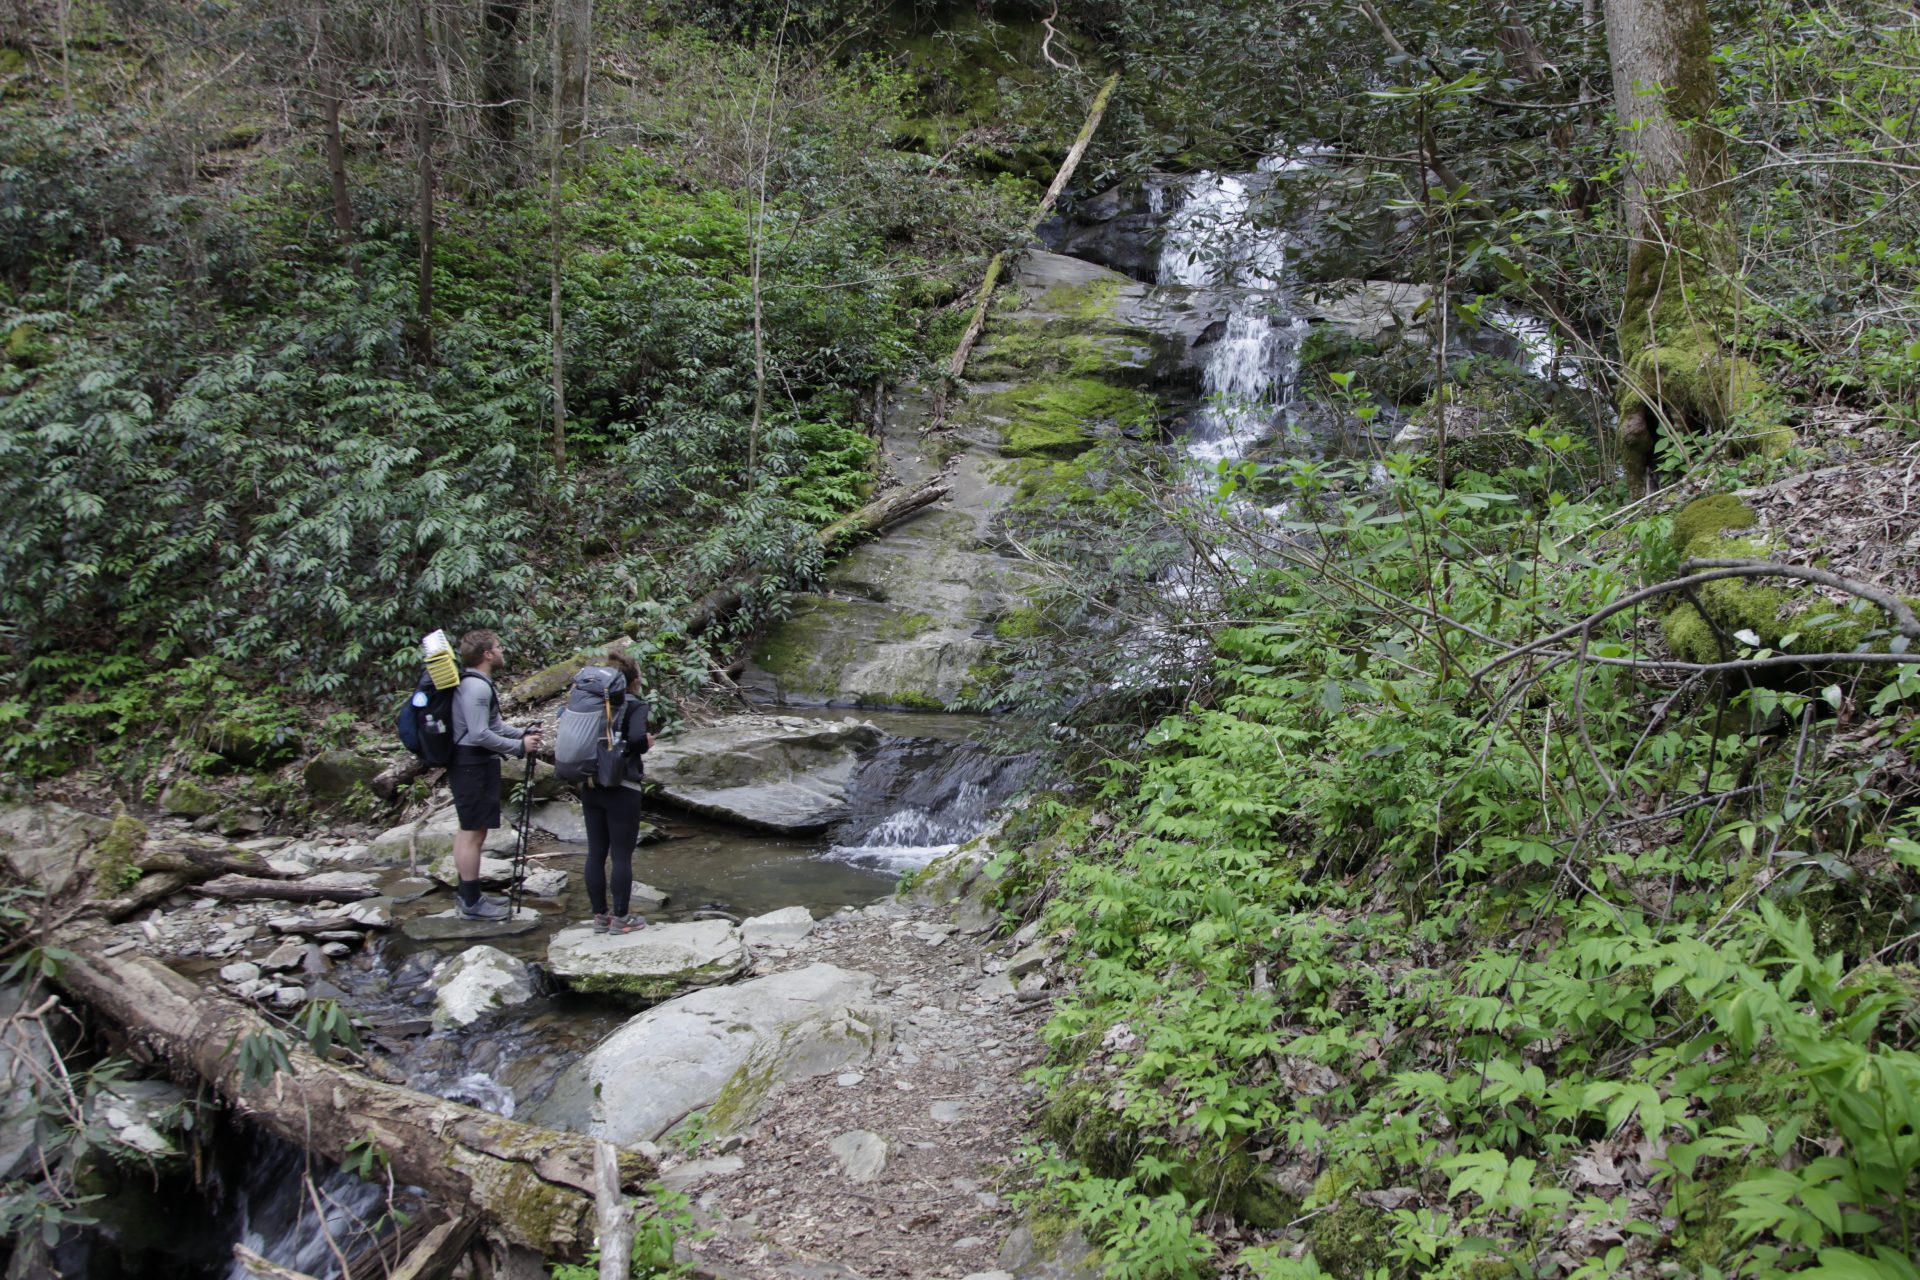 FILE PHOTO: In this March 30, 2020, photo, Alexandra Eagle, right, and Jonathan Hall stand in front of a waterfall on the Appalachian Trail in Cosby, Tenn. The couple planned the to hike from Georgia to Maryland until coronavirus concerns forced them off the trail.